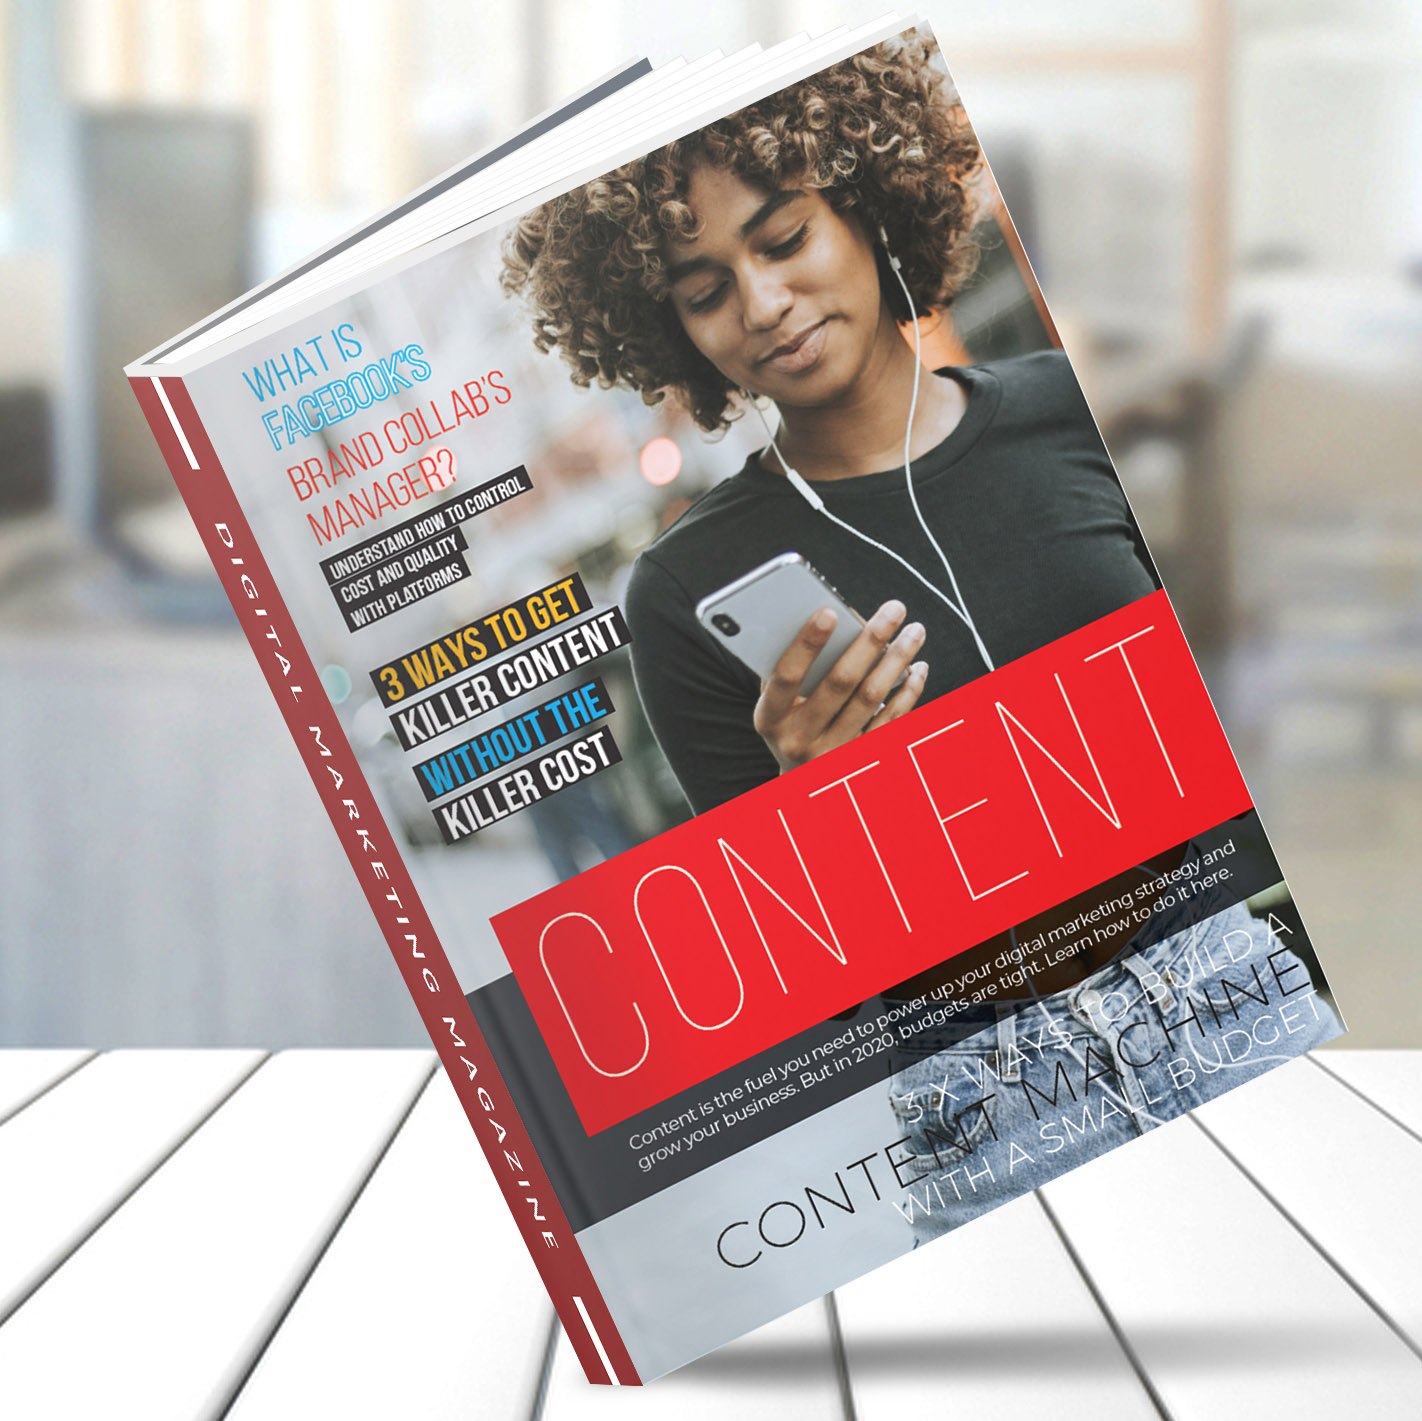 Cover of Volume 3 of Digital Marketing Magazine titled how to Create Killer Content without the Killer Cost